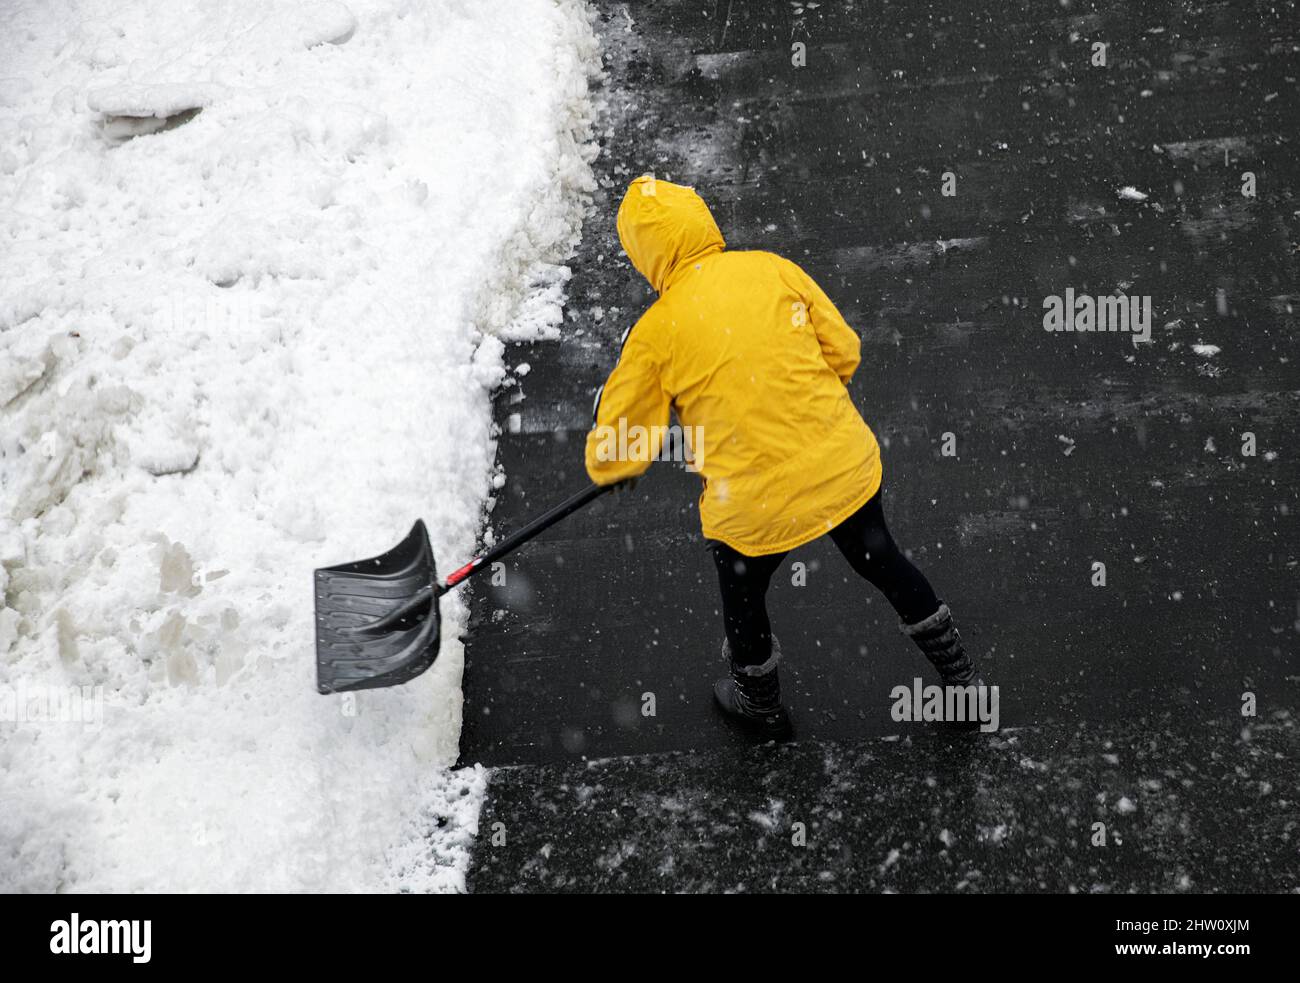 Shoveling driveway after a snow storm. Stock Photo